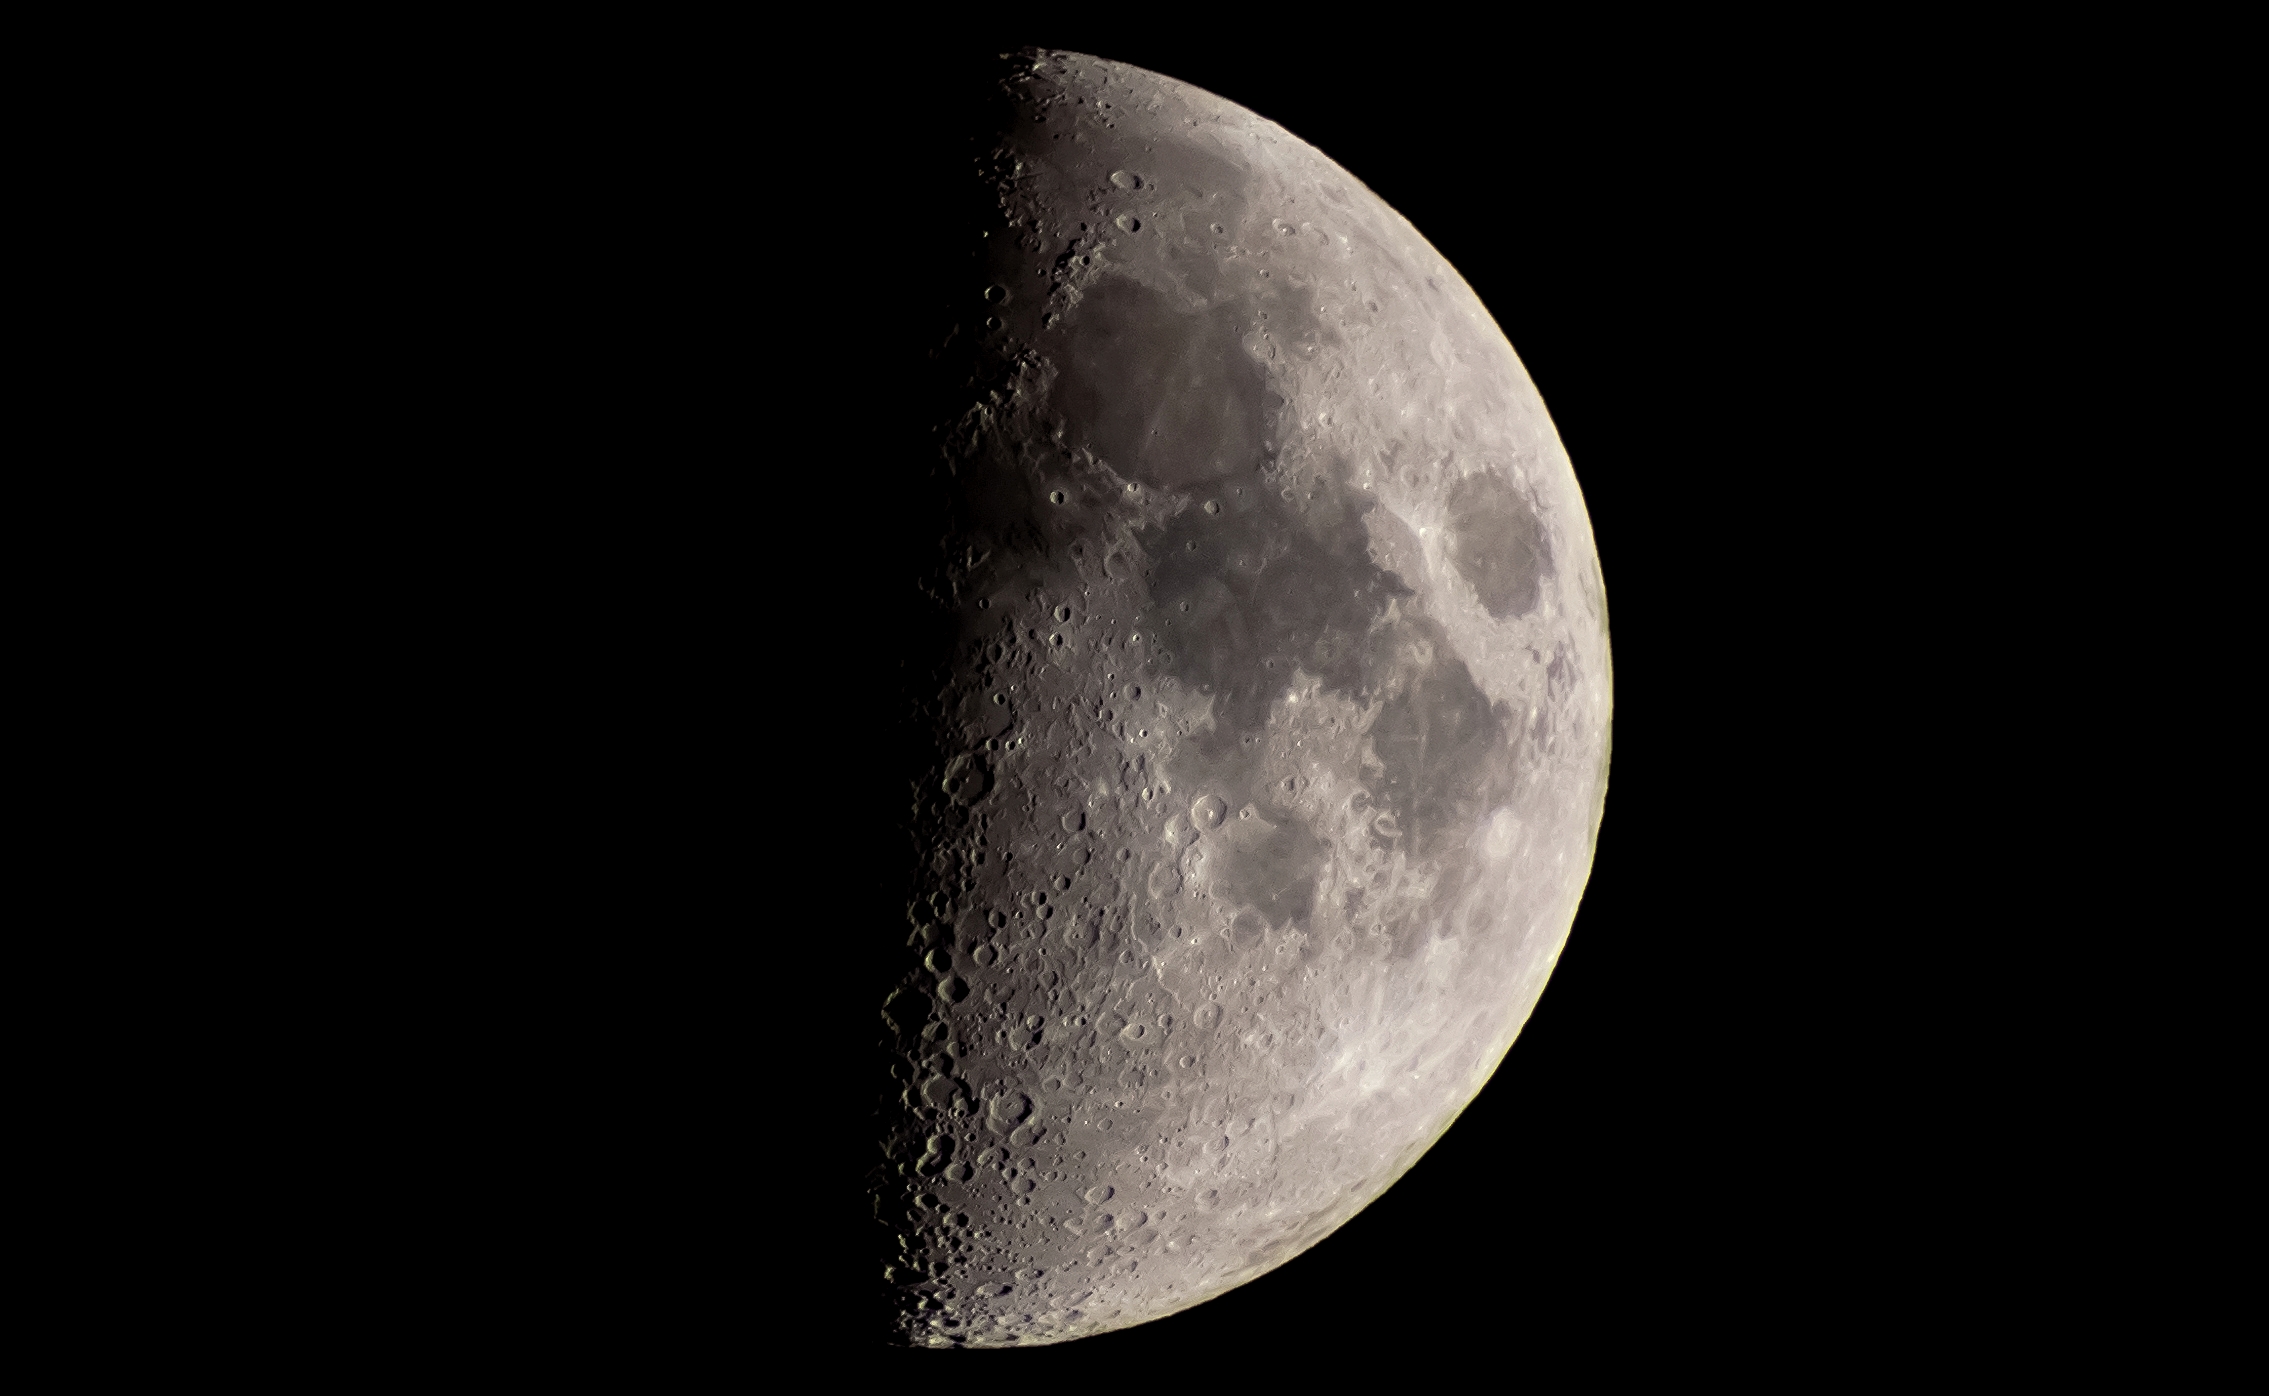  moon 50% 27/07/2020 at 21:42 with neewer500f/8...